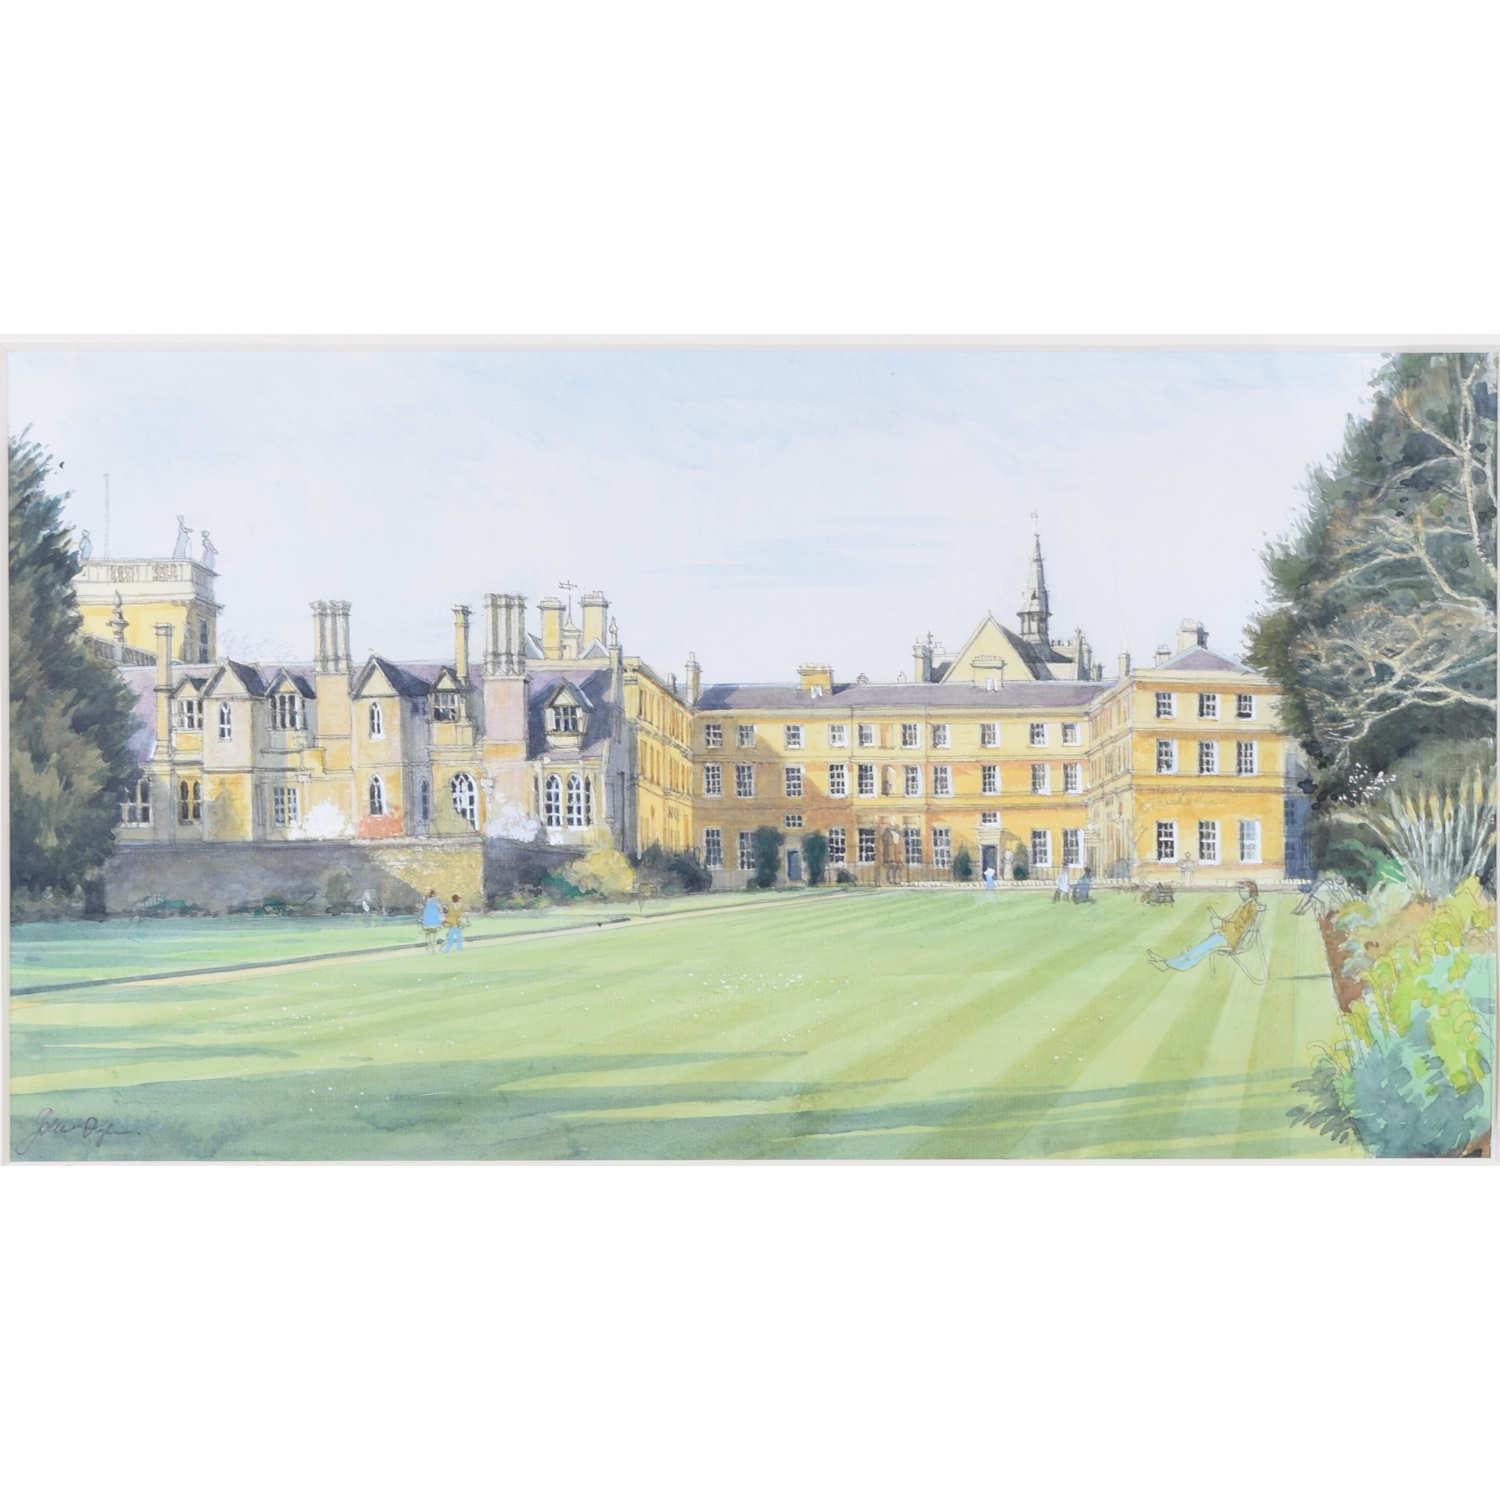 To see our other views of Oxford and Cambridge, scroll down to "More from this Seller" and below it click on "See all from this Seller" - or send us a message if you cannot find the view you want.

John Doyle (born 1928)
Trinity College,